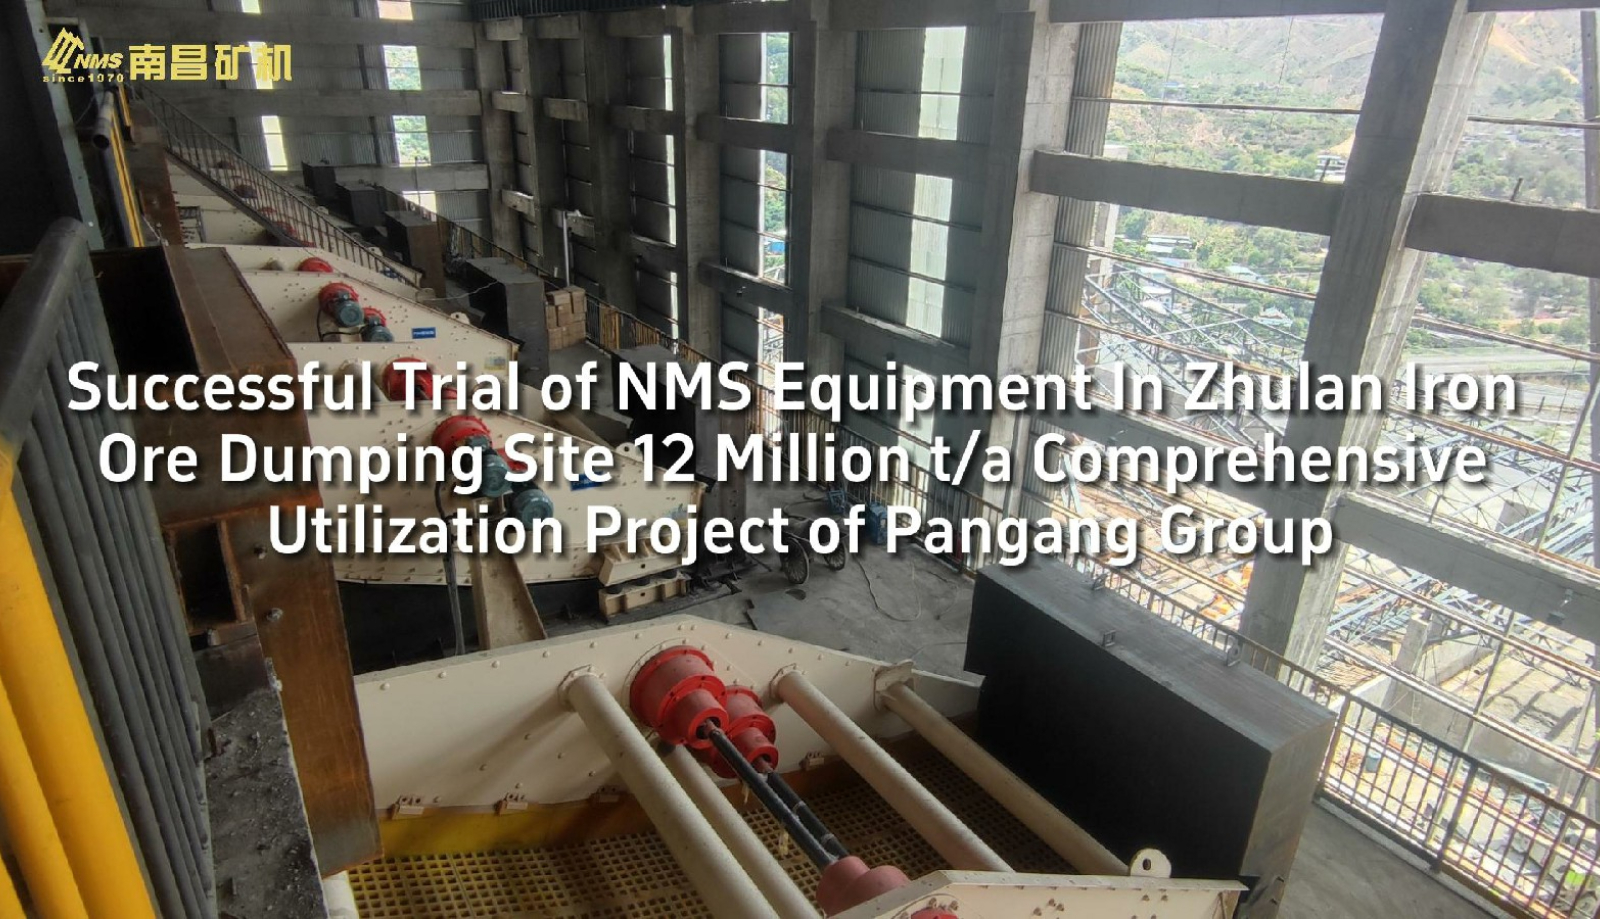 Successful Trial of NMS！ Equipment  In Zhulan Iron Ore Dumping Site 12 Million t/a Comprehensive Utilization Project of Pangang Group